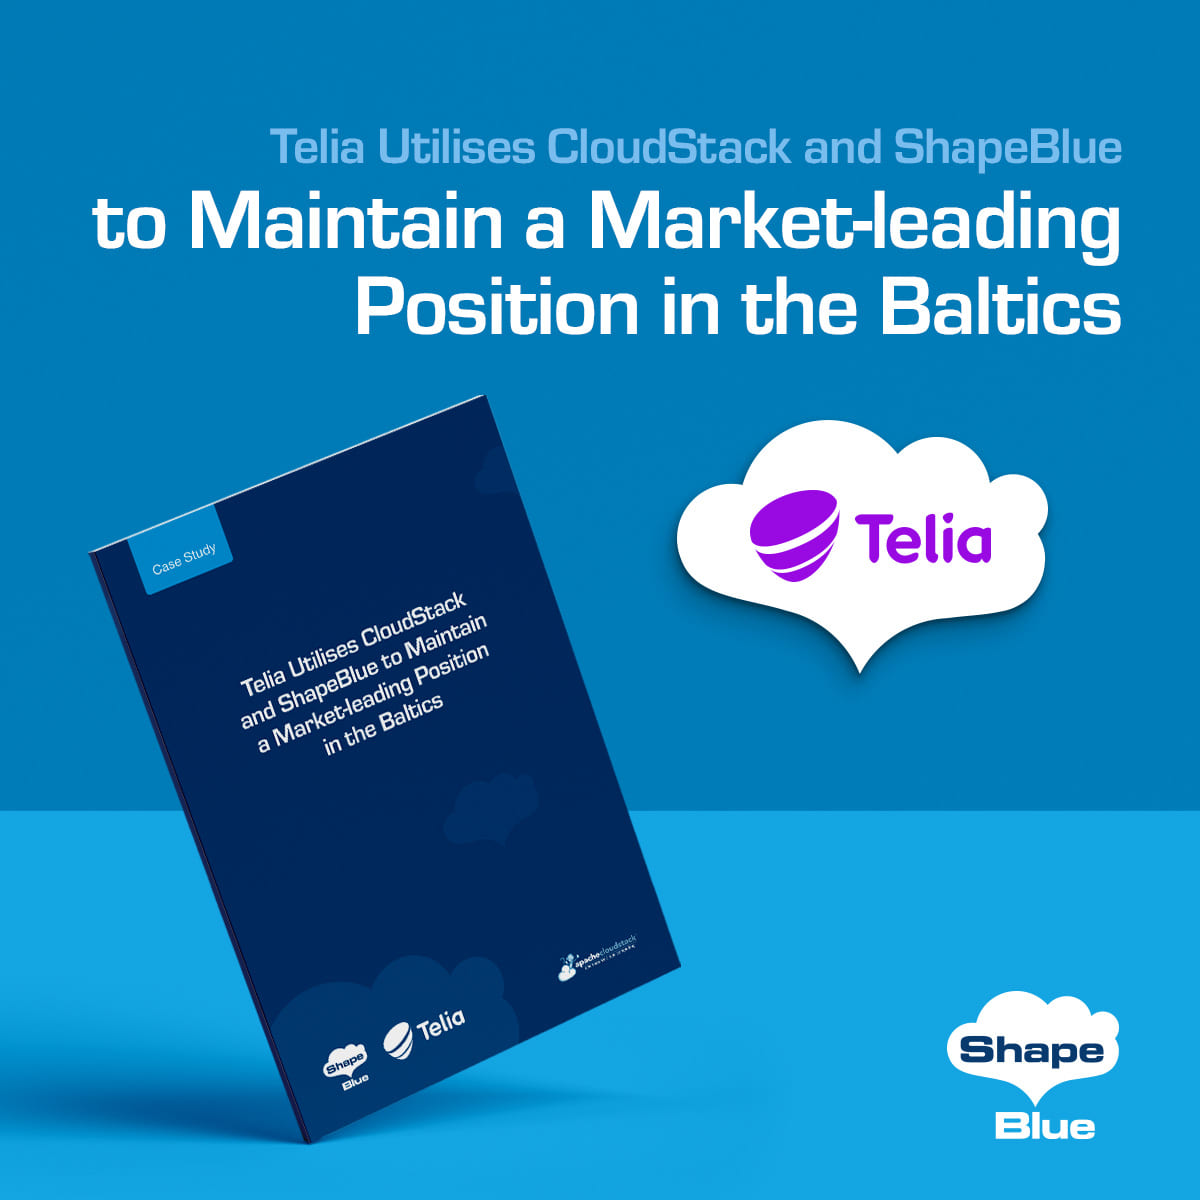 Telia Utilises CloudStack and ShapeBlue to Maintain a Market-leading Position in the Baltics - social